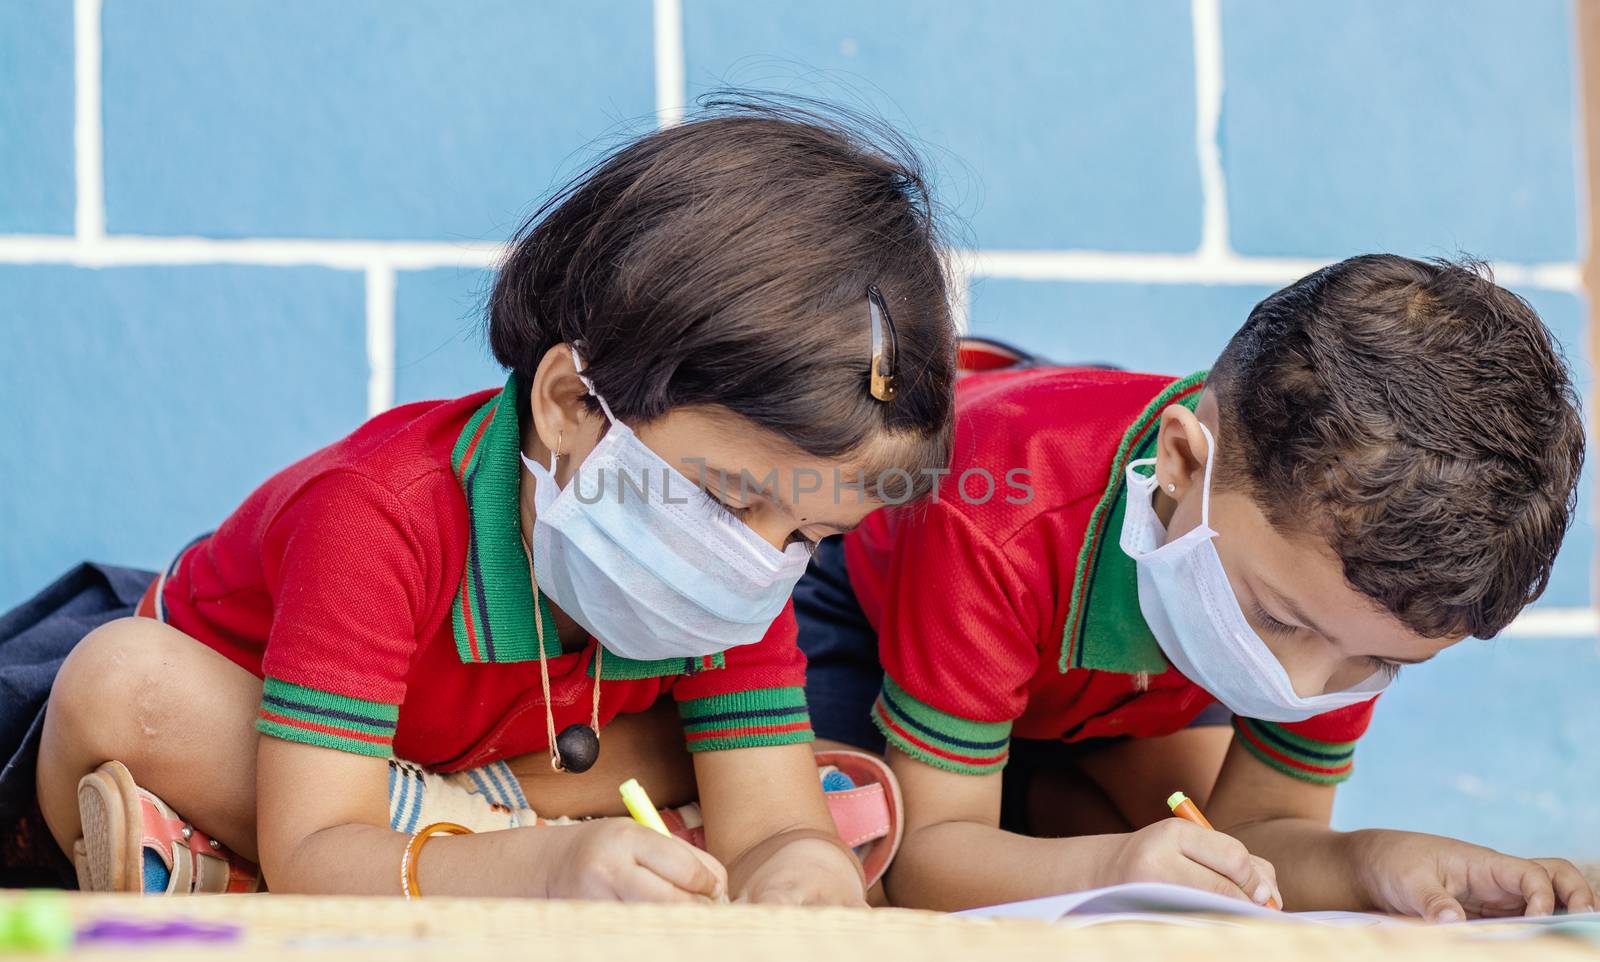 Kids busy in writing with medical face mask wearing due to covid-19 or coronavirus outbreak or pandemic at school - children painting at home during lockdown. by lakshmiprasad.maski@gmai.com